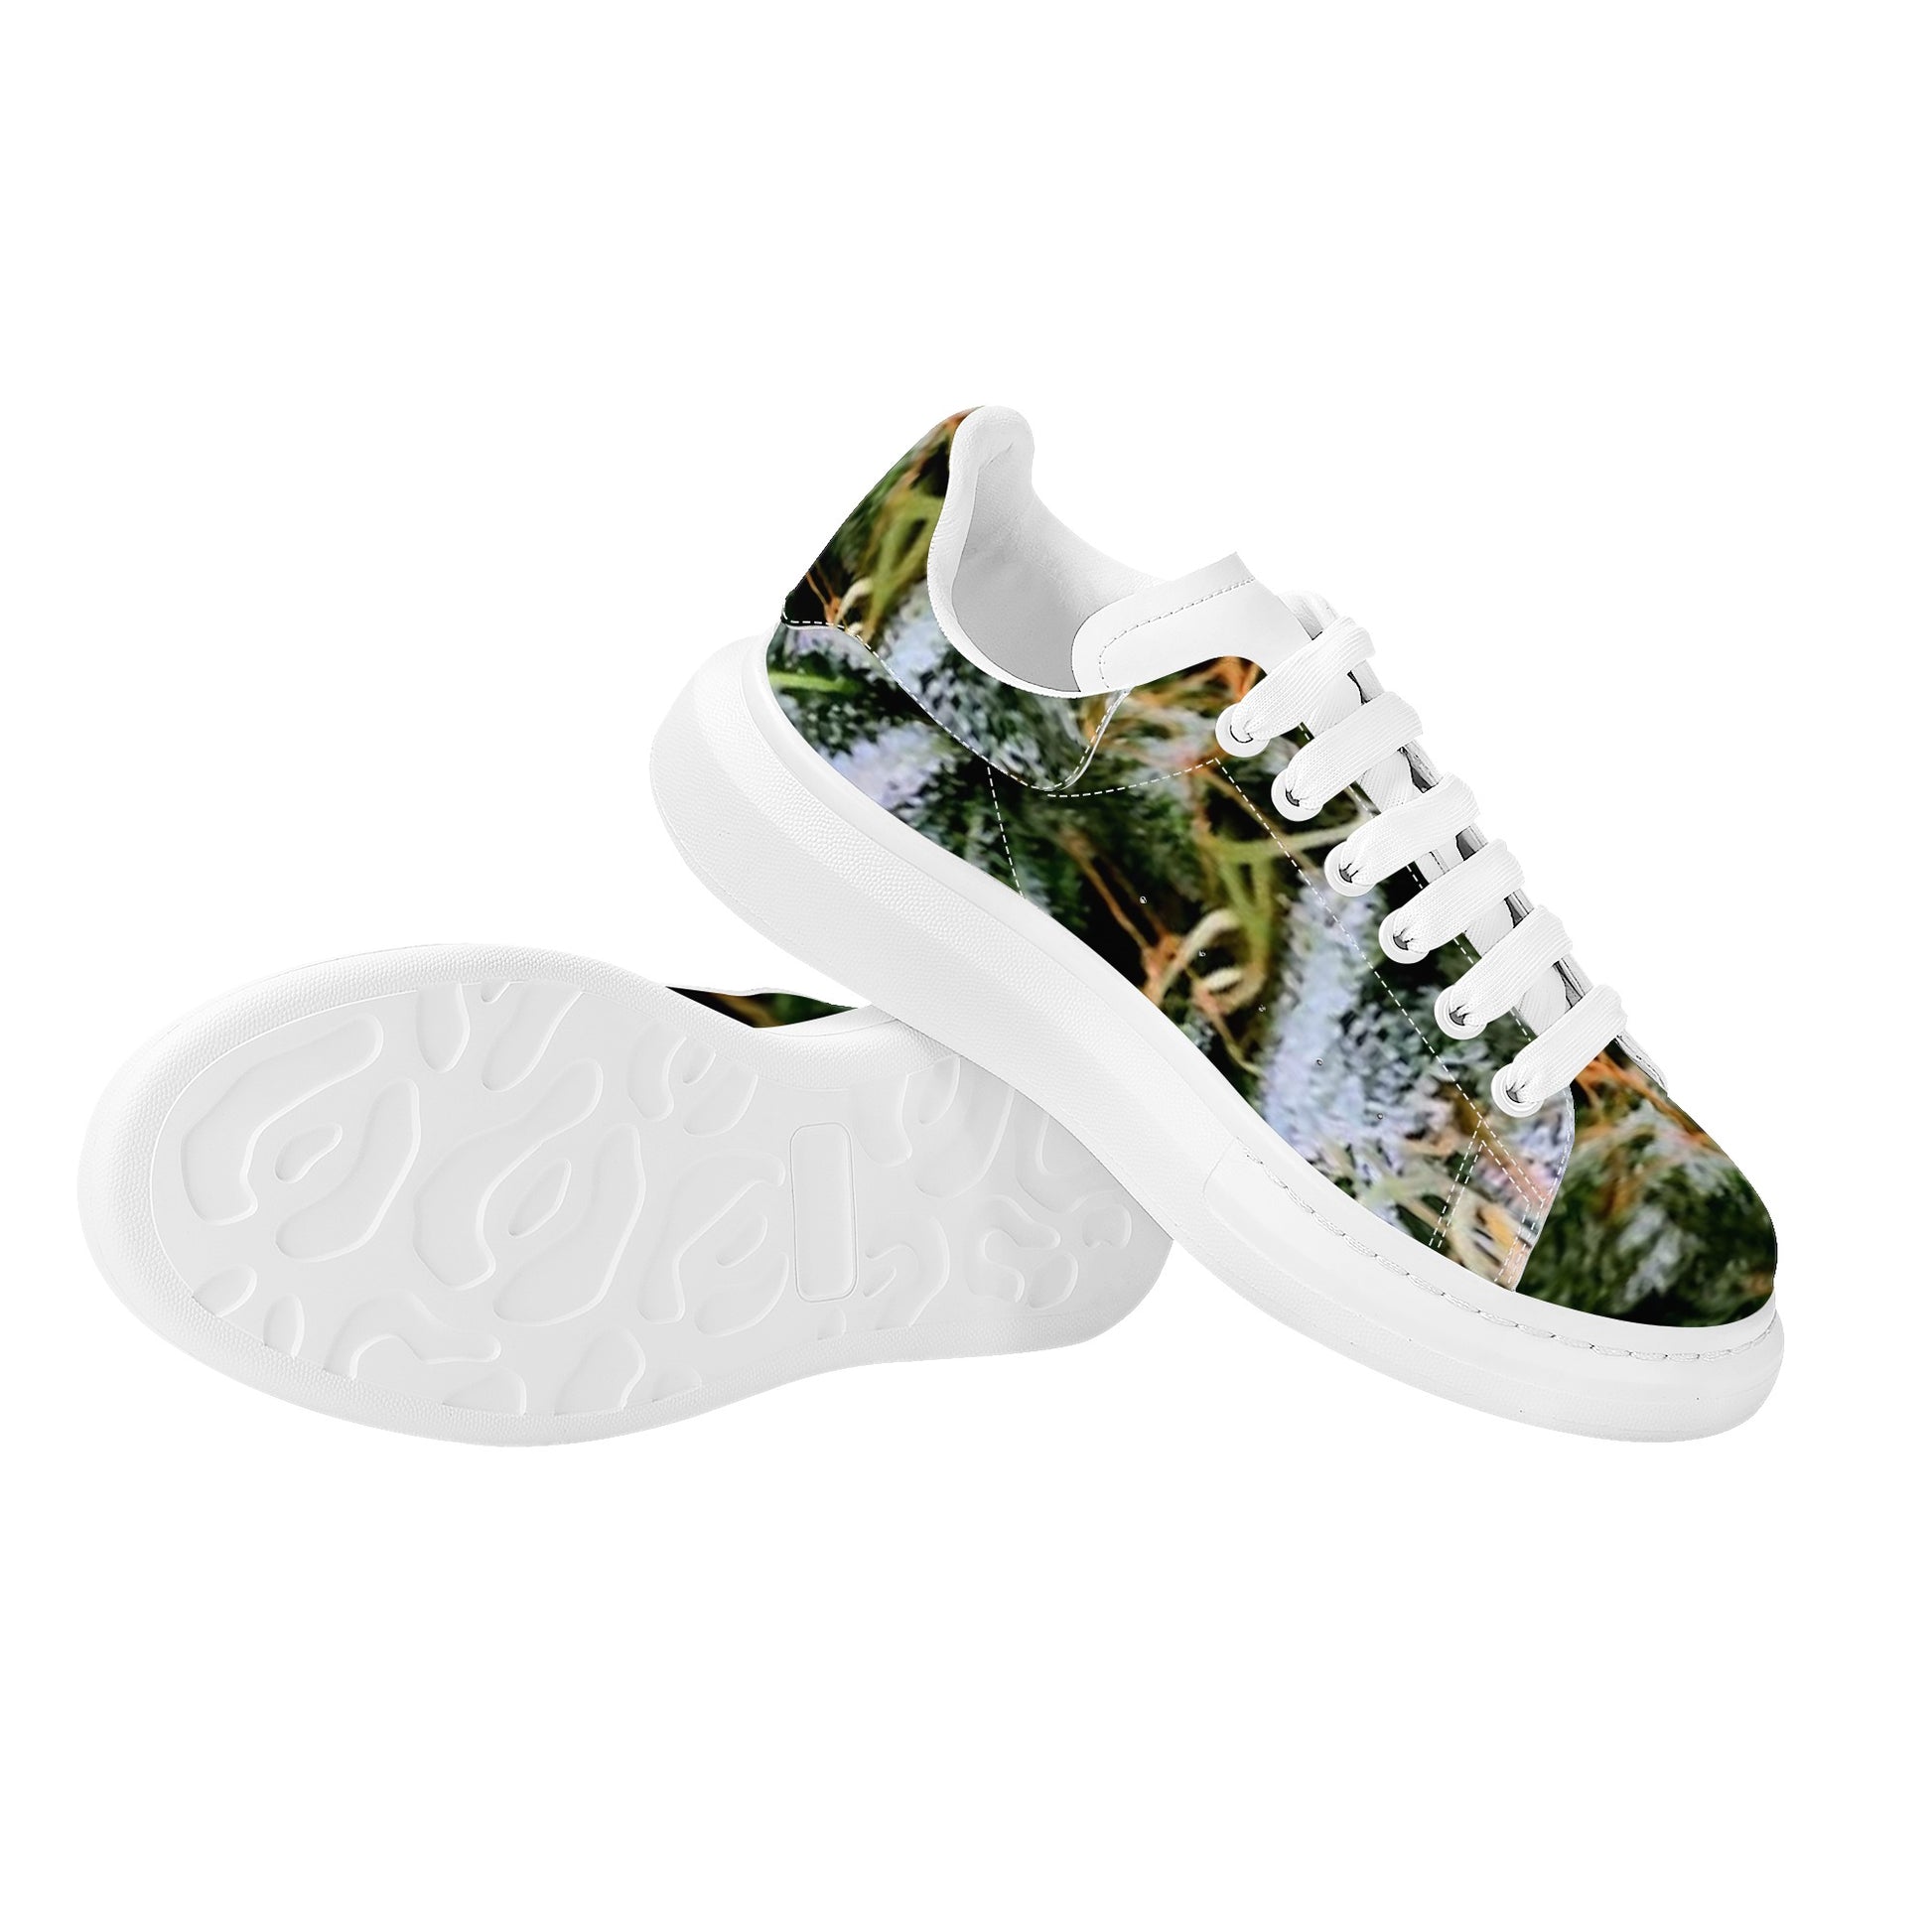 FZ Men's White Tongue Weed Chunky Shoes - FZwear